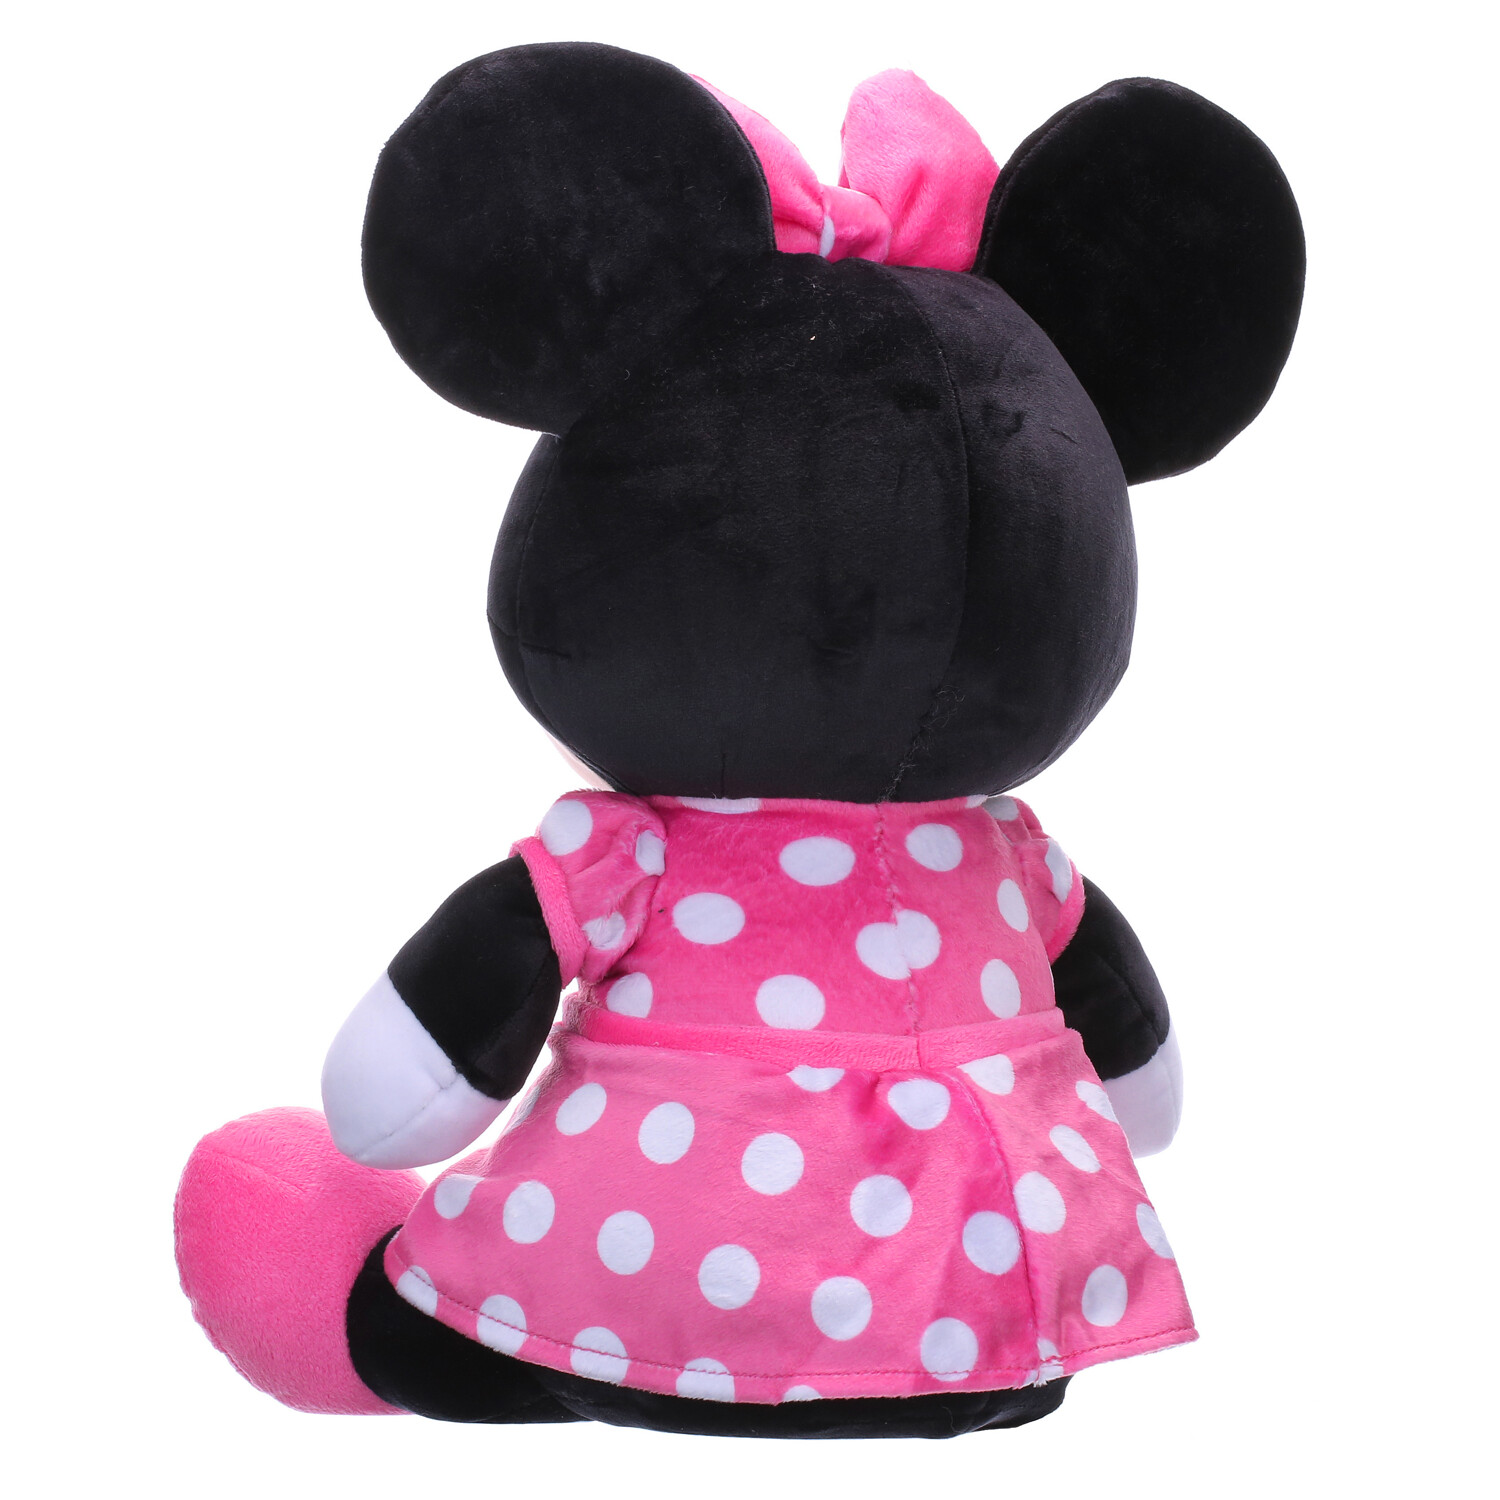 2021 Disney Parks Weighted Emotional Support Plush Minnie Mouse New